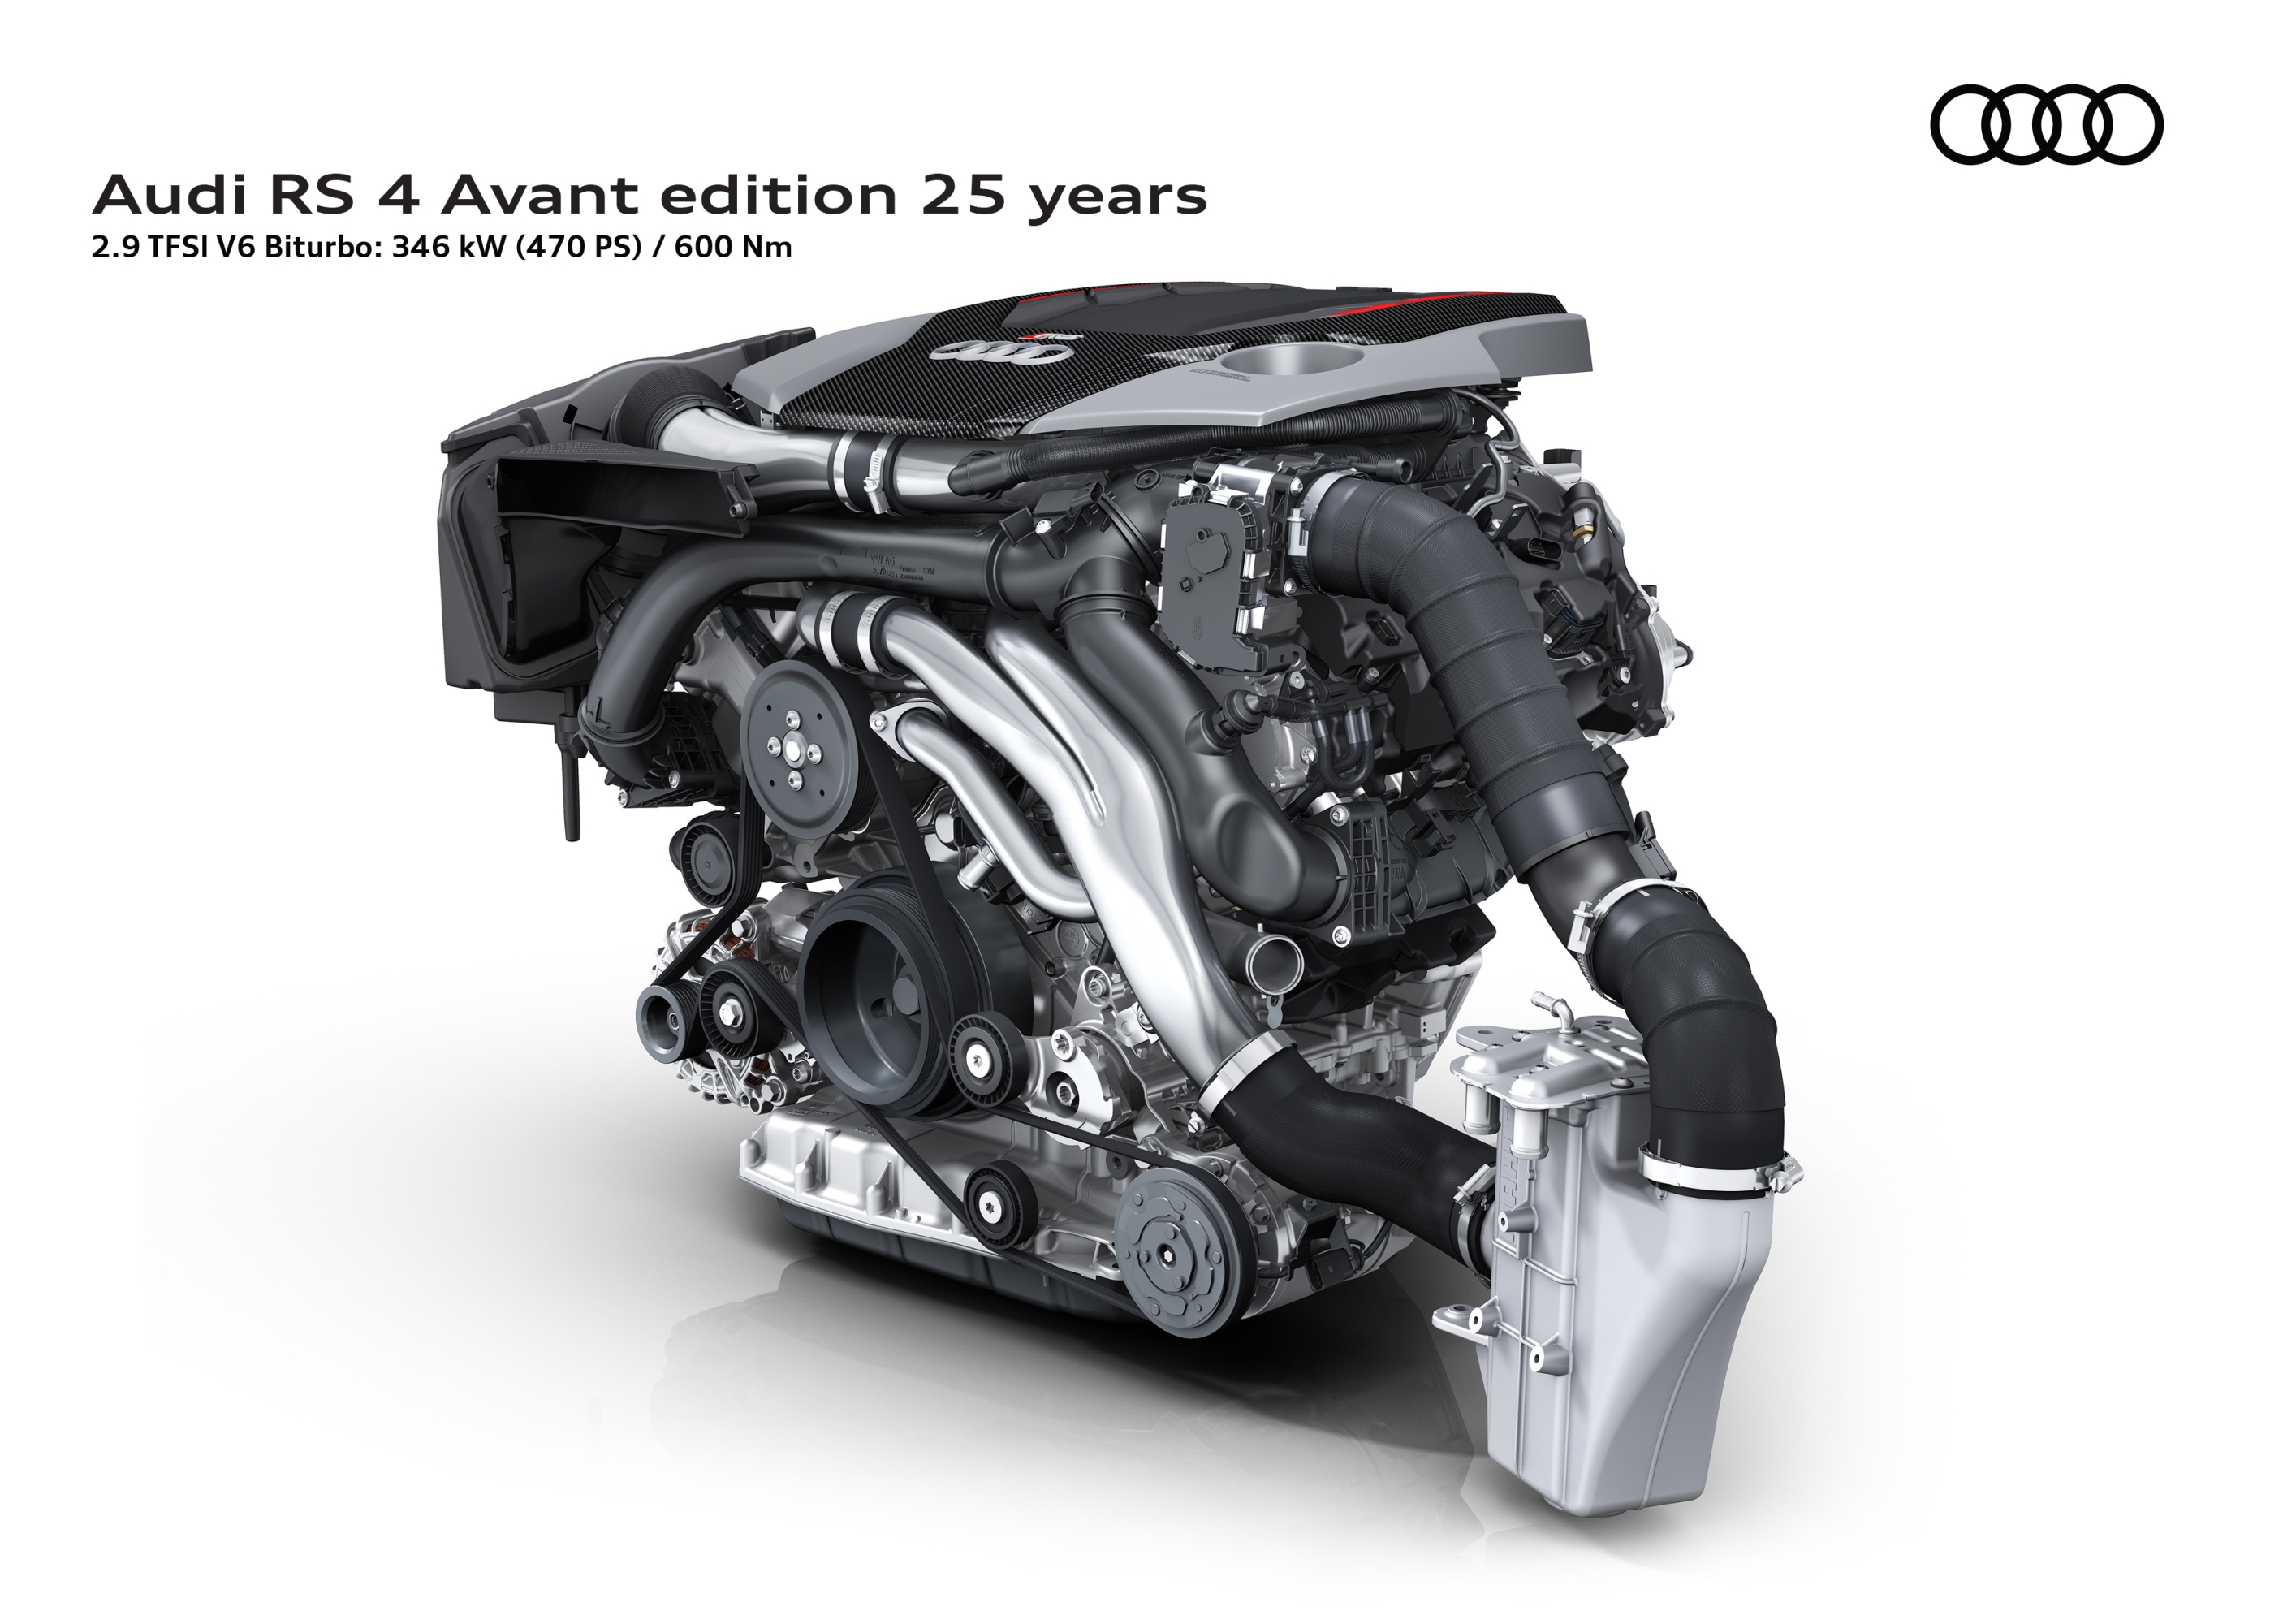 The V6 biturbo in the new RS 4 Avant edition 25 years has an output of 346 kW (470 PS) and a maximum torque of 600 Nm.